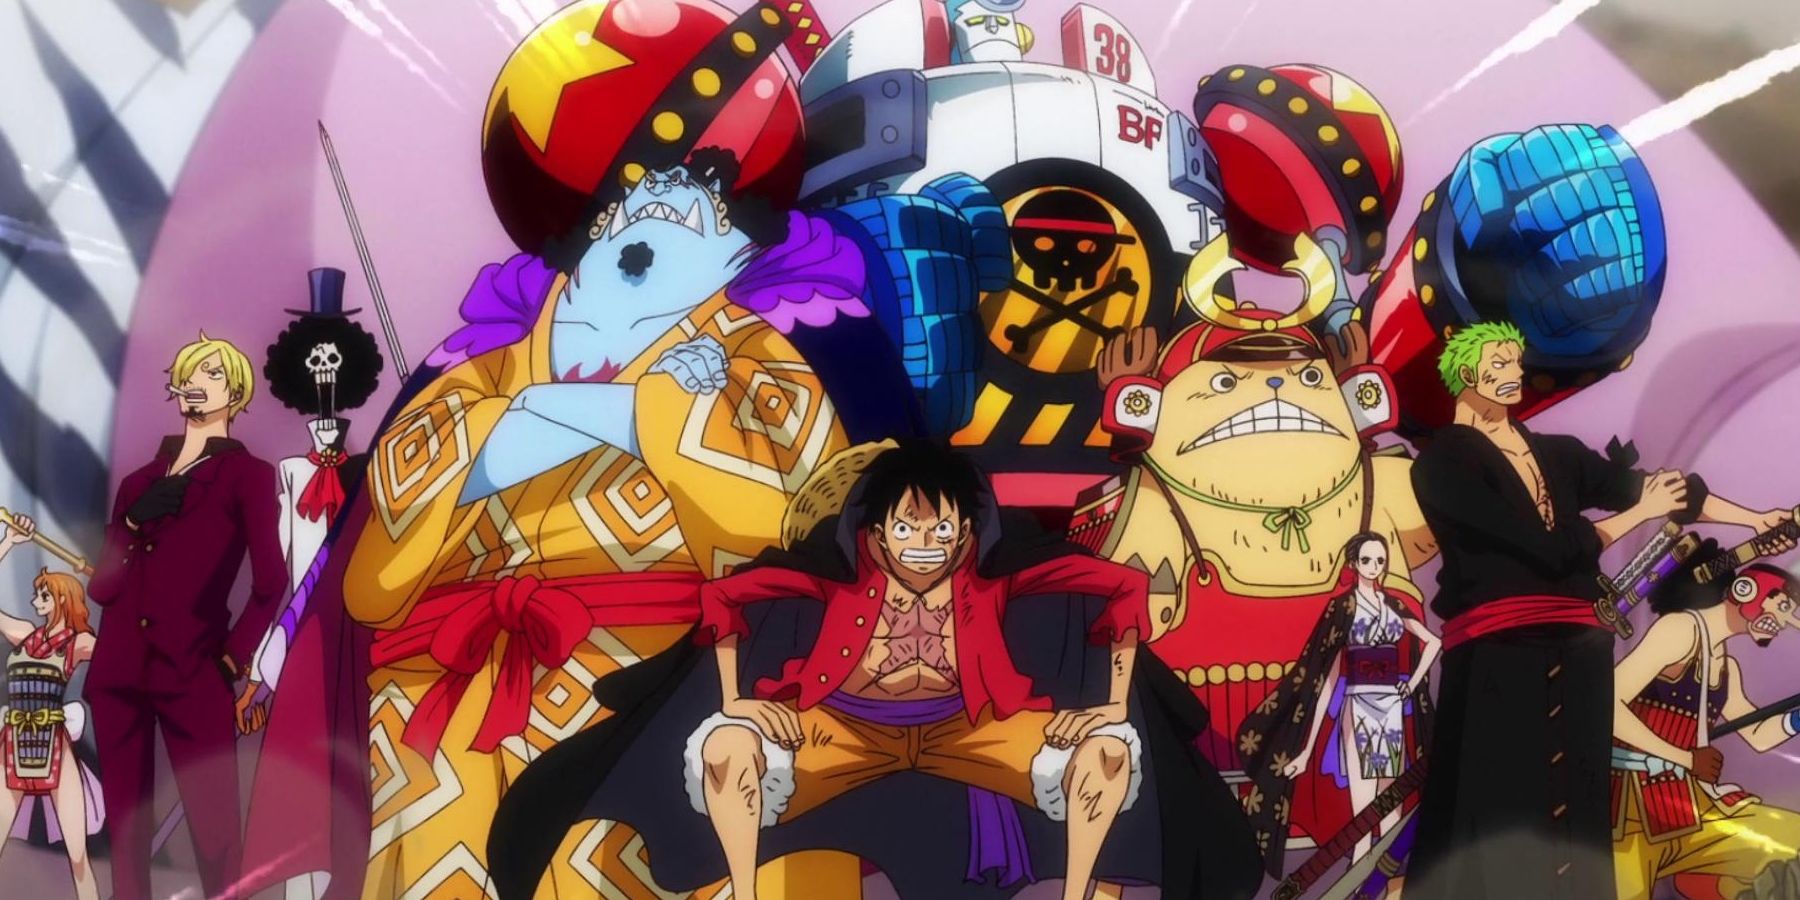 The Straw Hats gathered